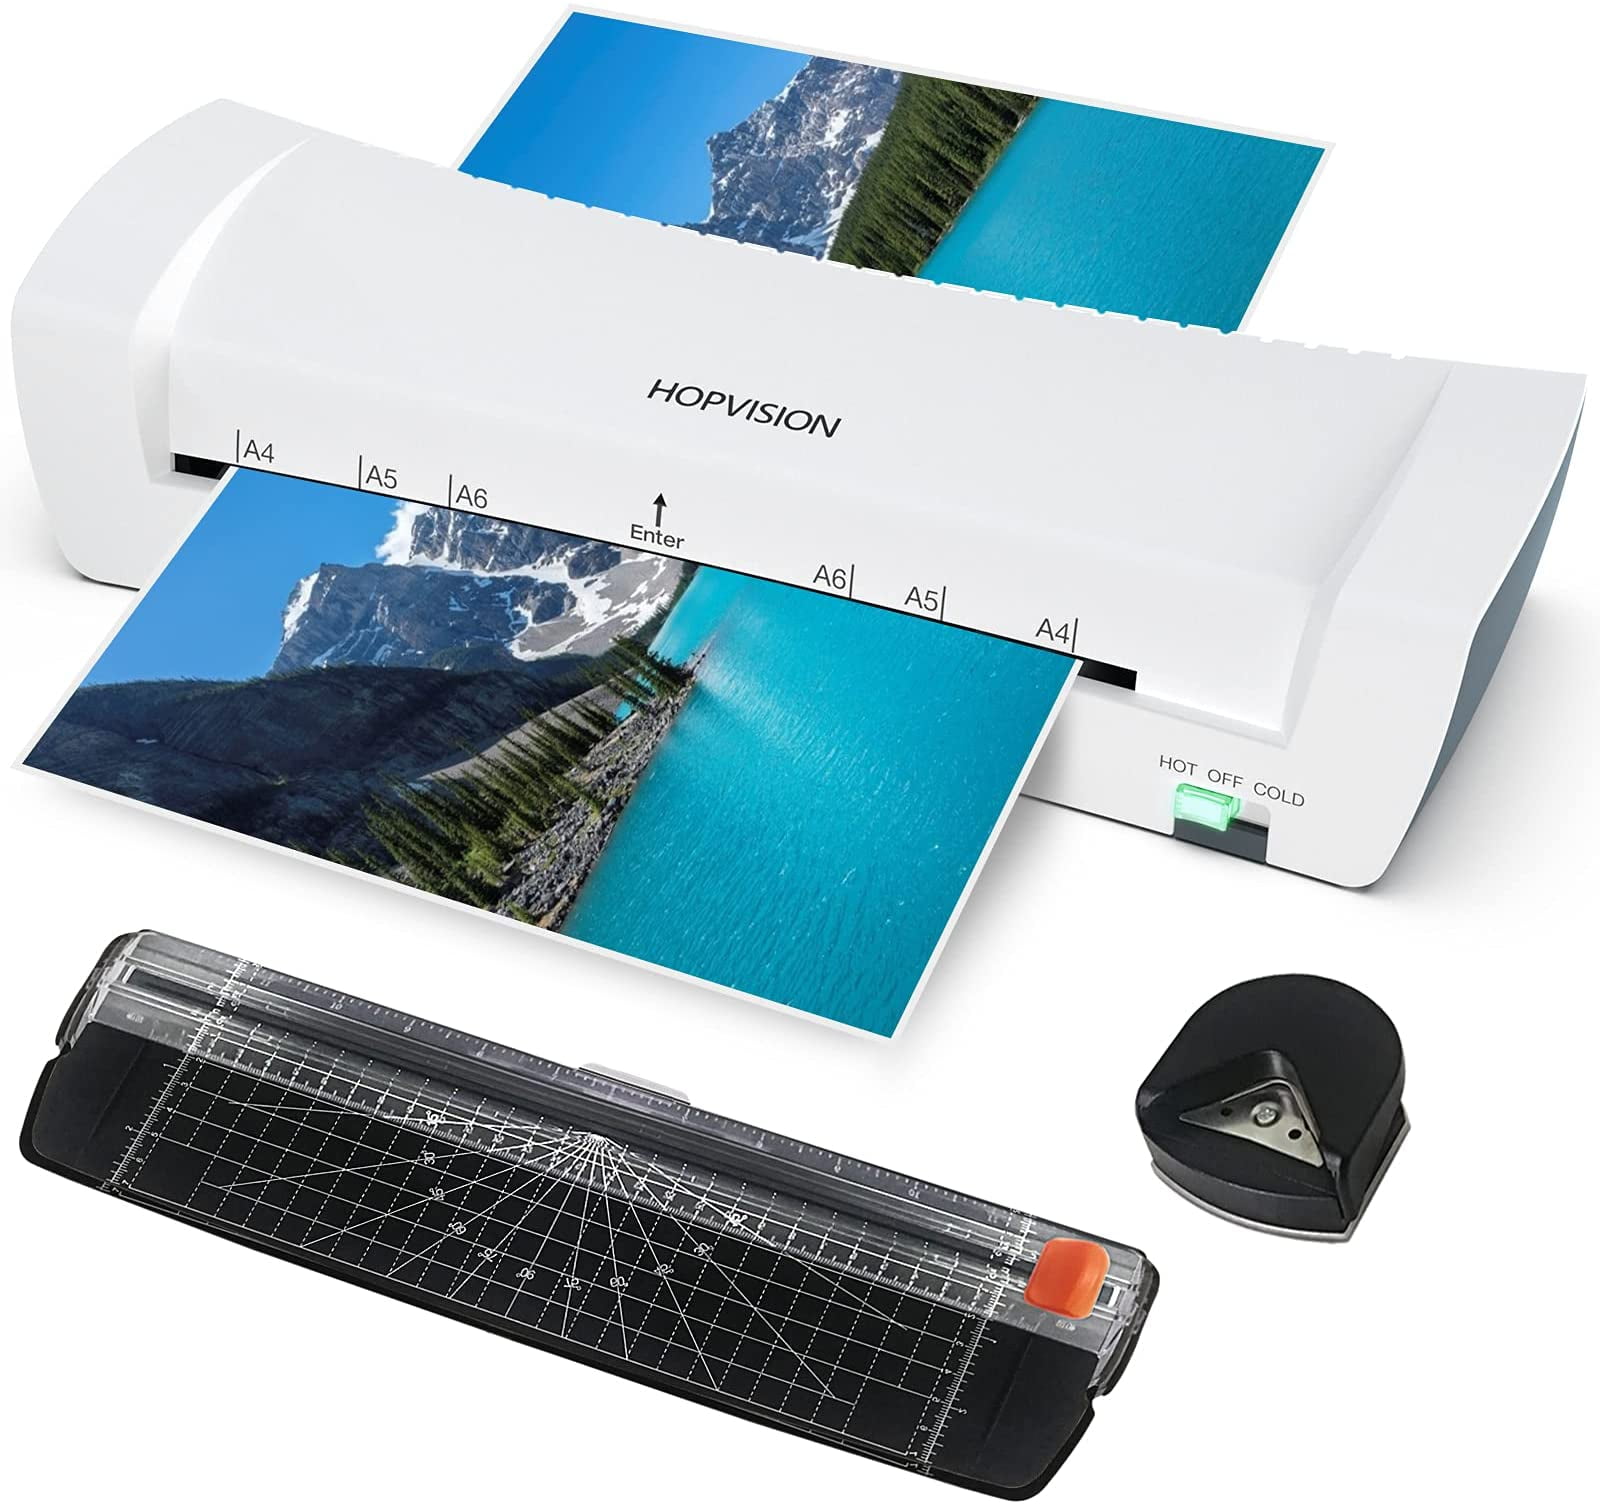 A4 PERSONAL LAMINATOR LAMINATING MACHINE COMPACT SCHOOL HOME OFFICE FOR A4 A5 A6 